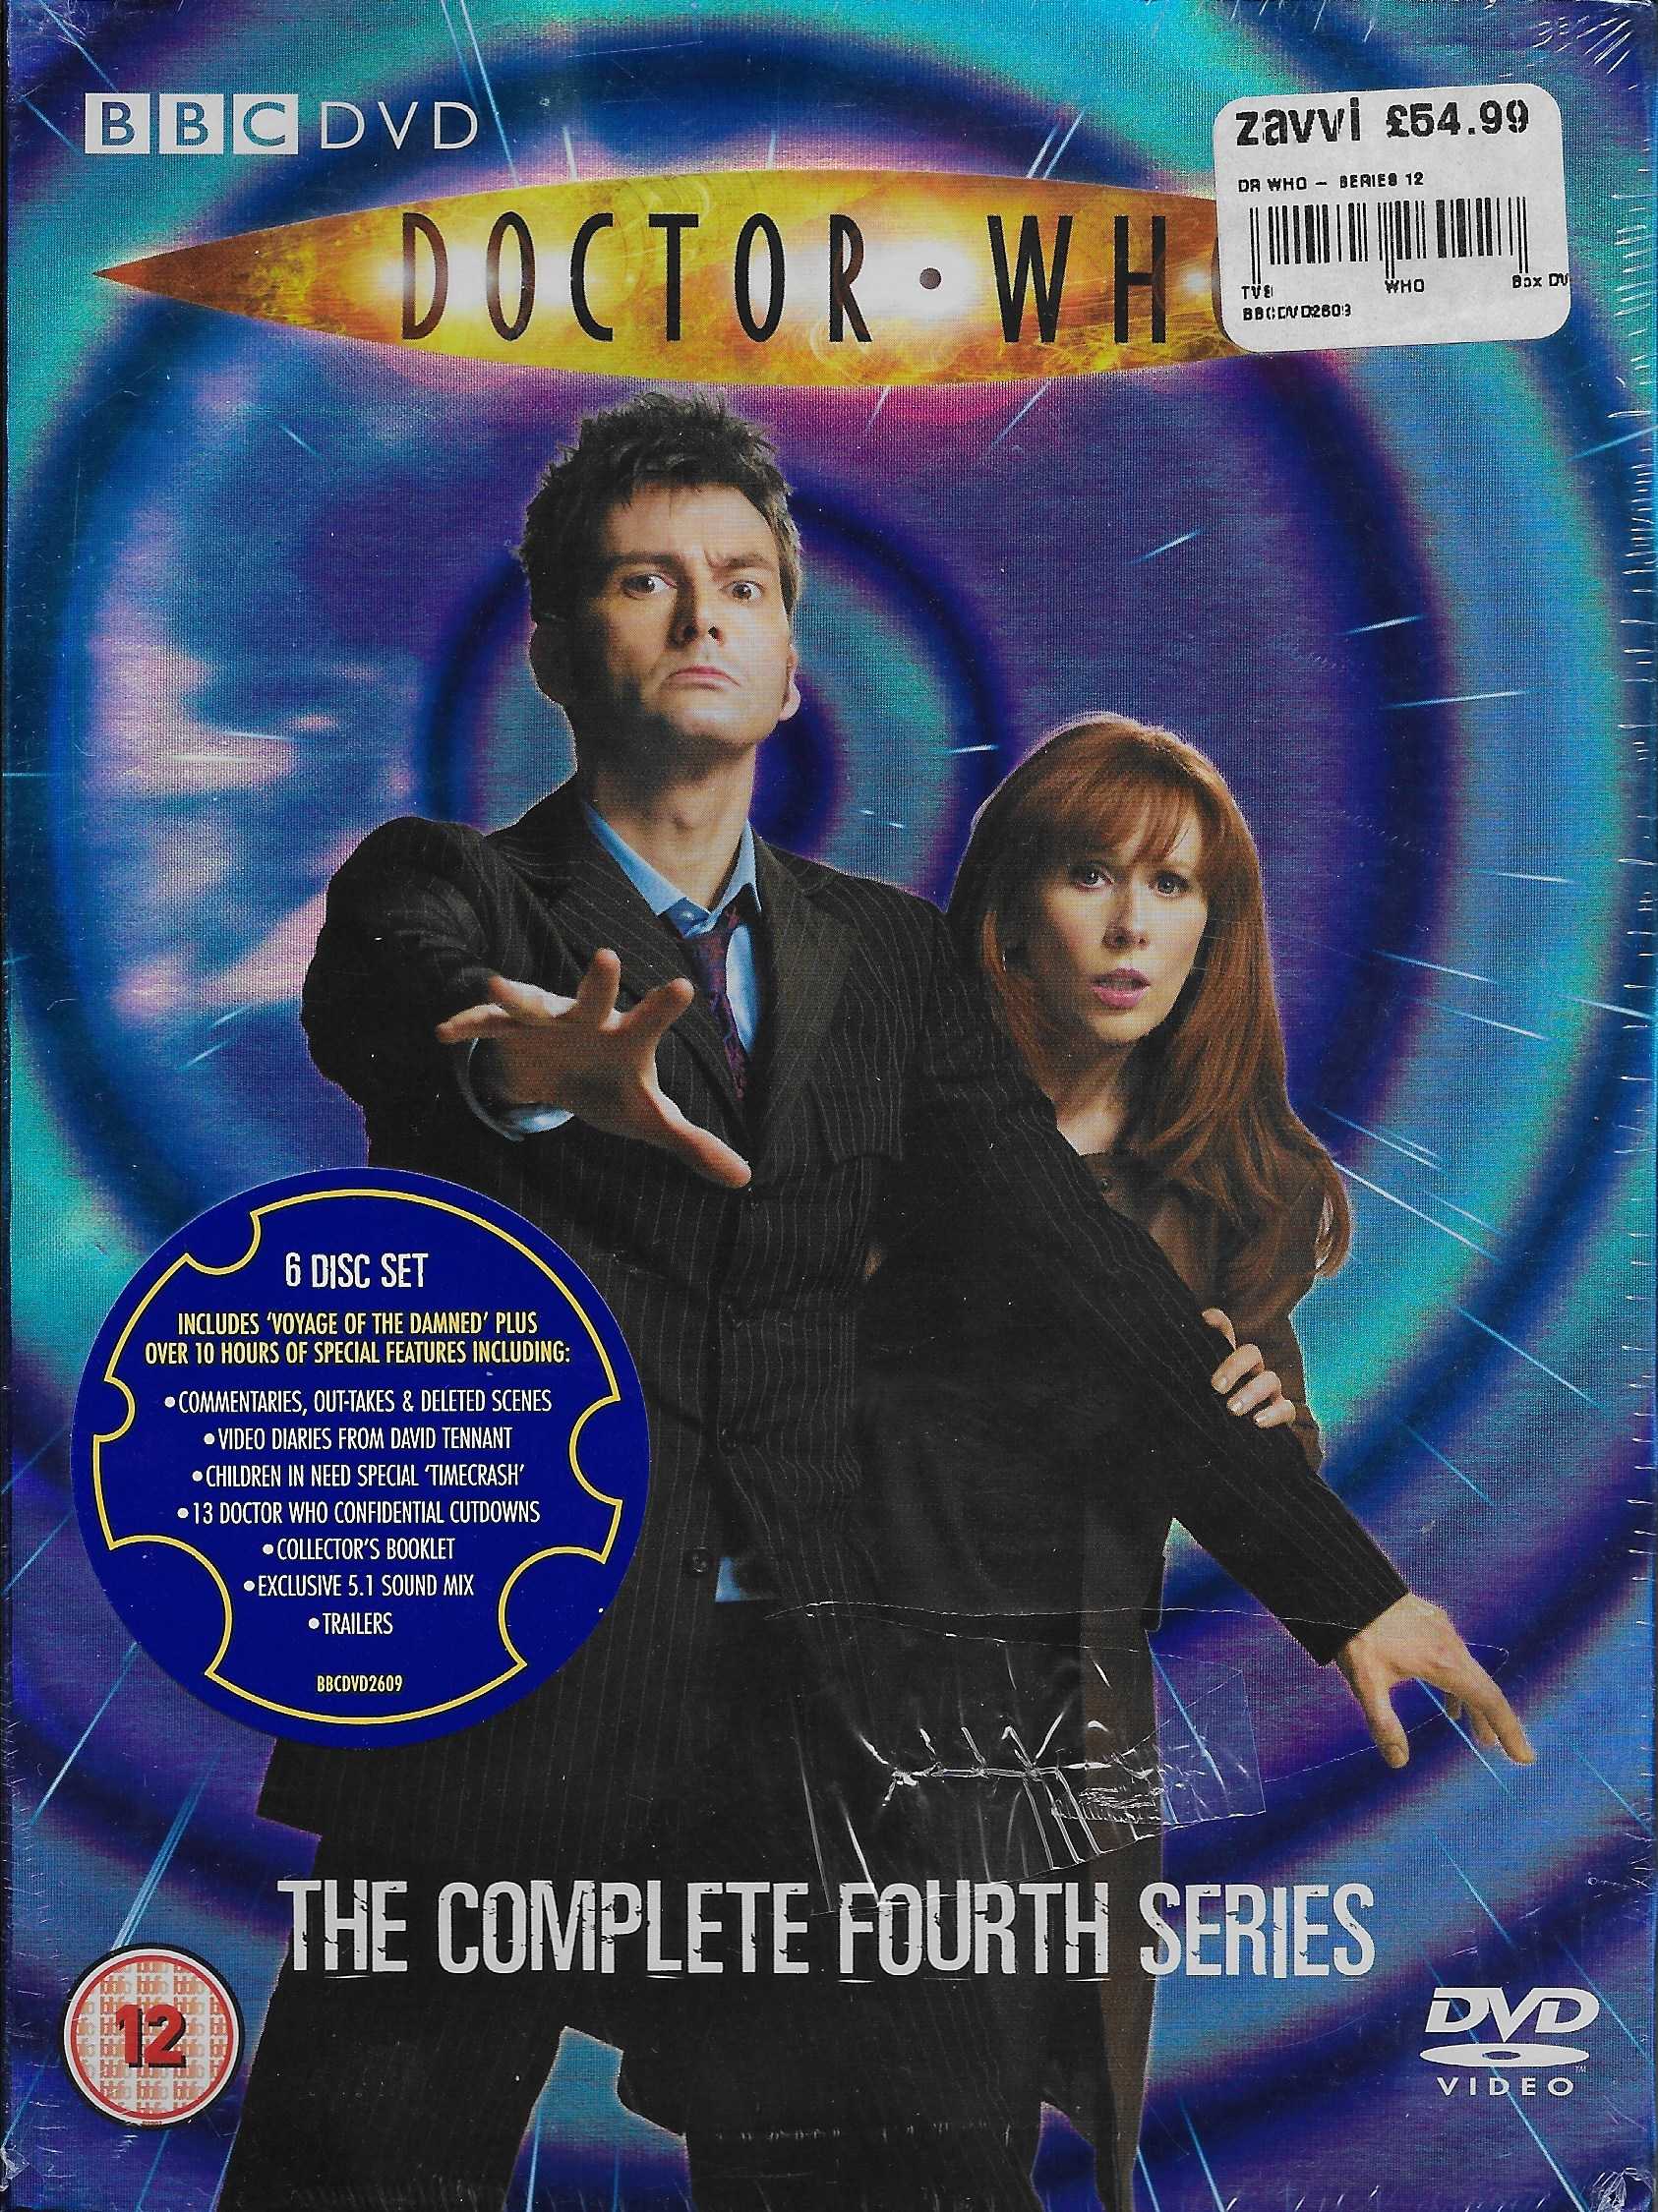 Picture of BBCDVD 2609 Doctor Who - Series 4 by artist Various from the BBC records and Tapes library